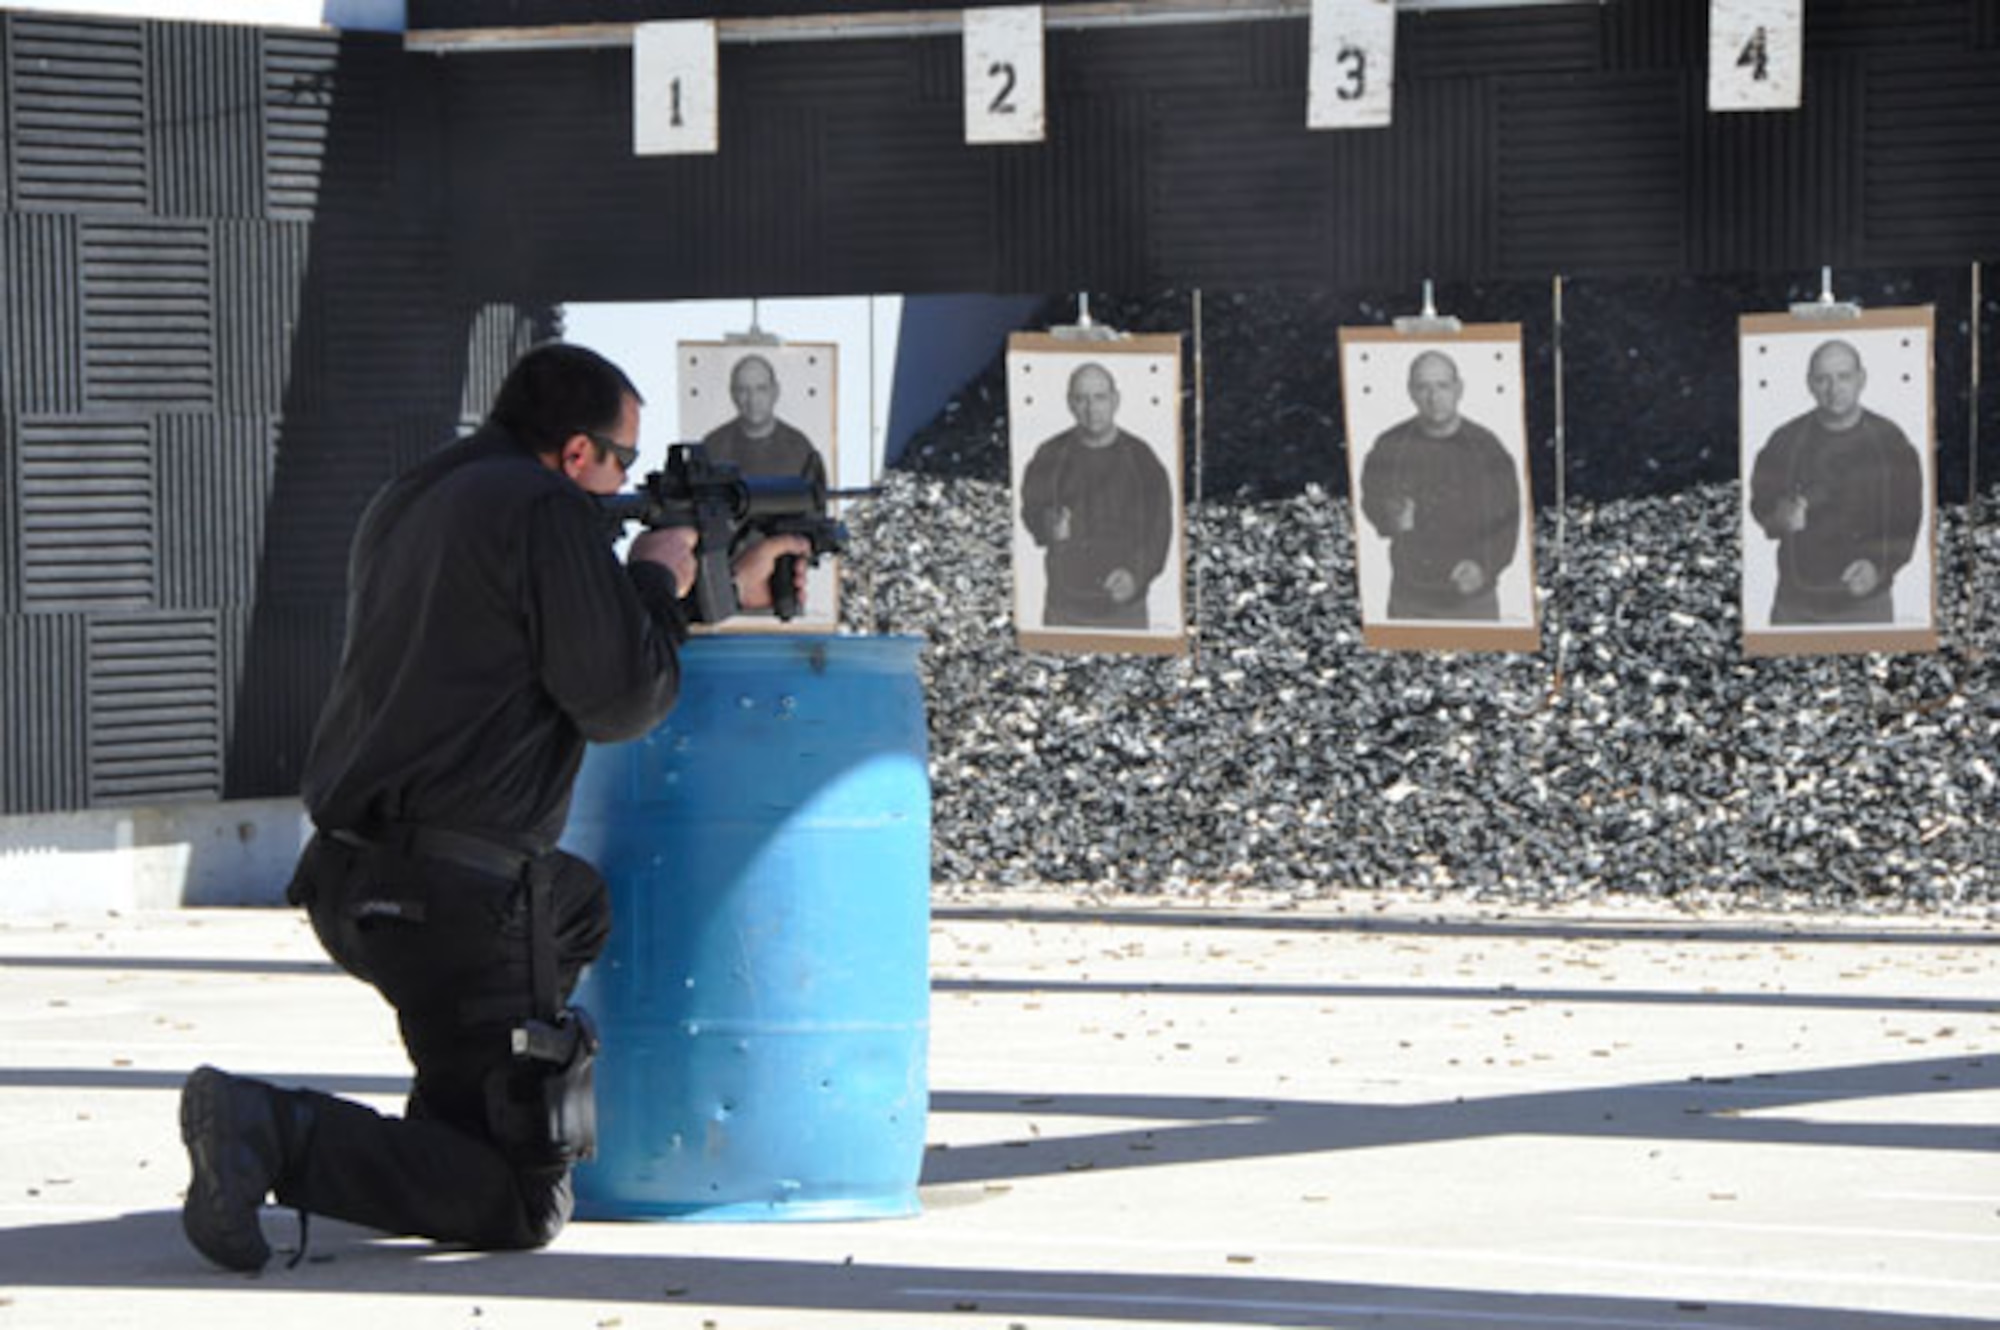 Law enforcement agencies from throughout California now gather at the former Air Force base, where a tactical village, shoot house and firing range provide facilities for specialized SWAT training.